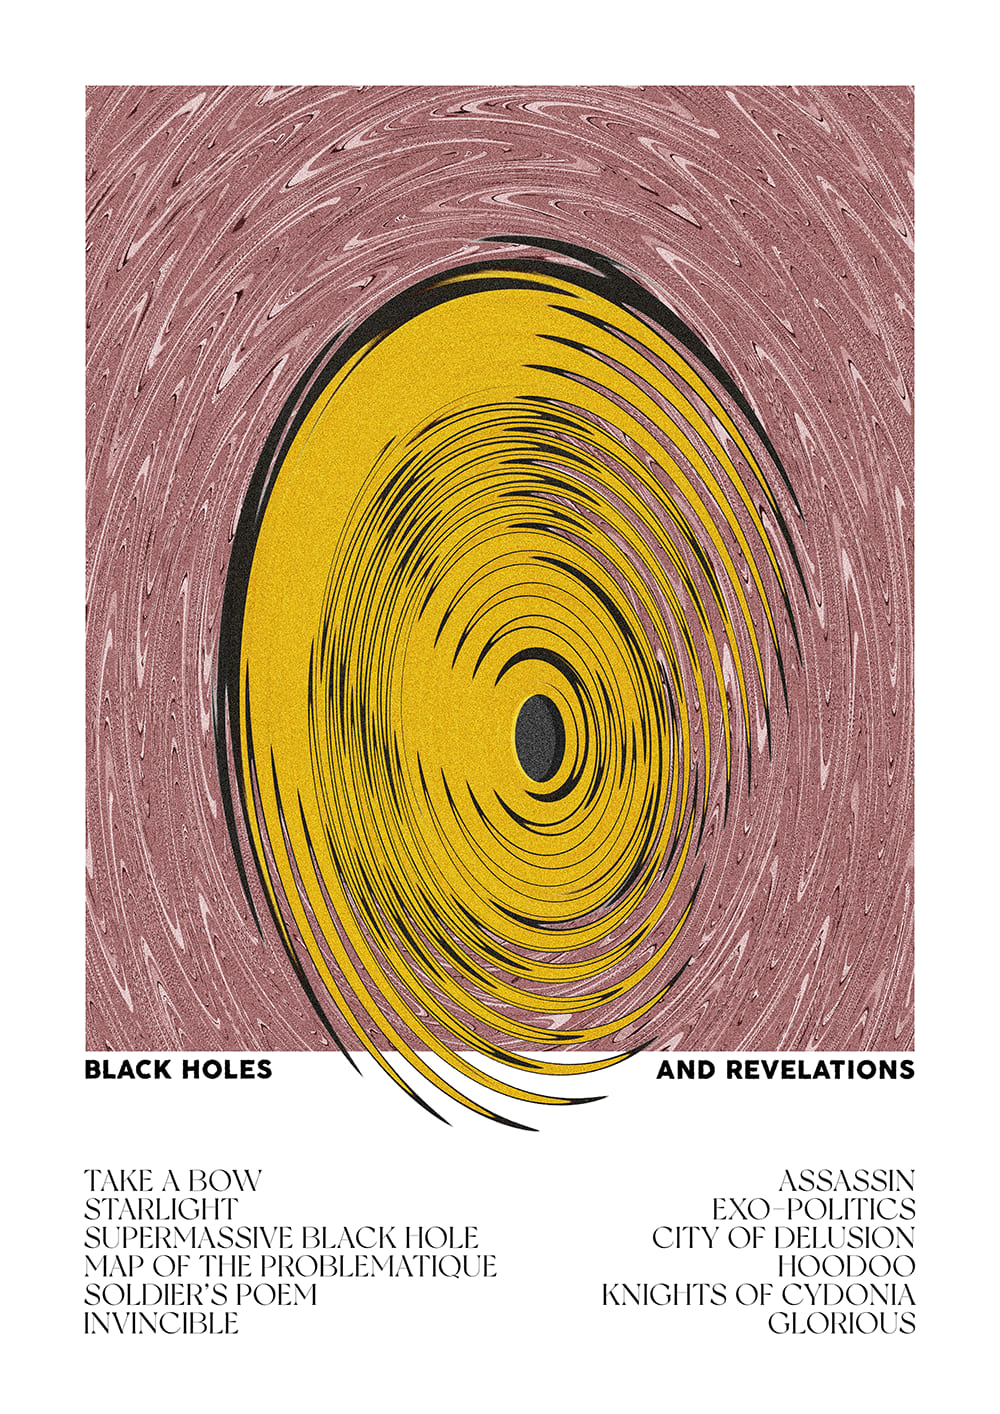 The poster design practice continues! Muse - Black Holes and Revelations :]